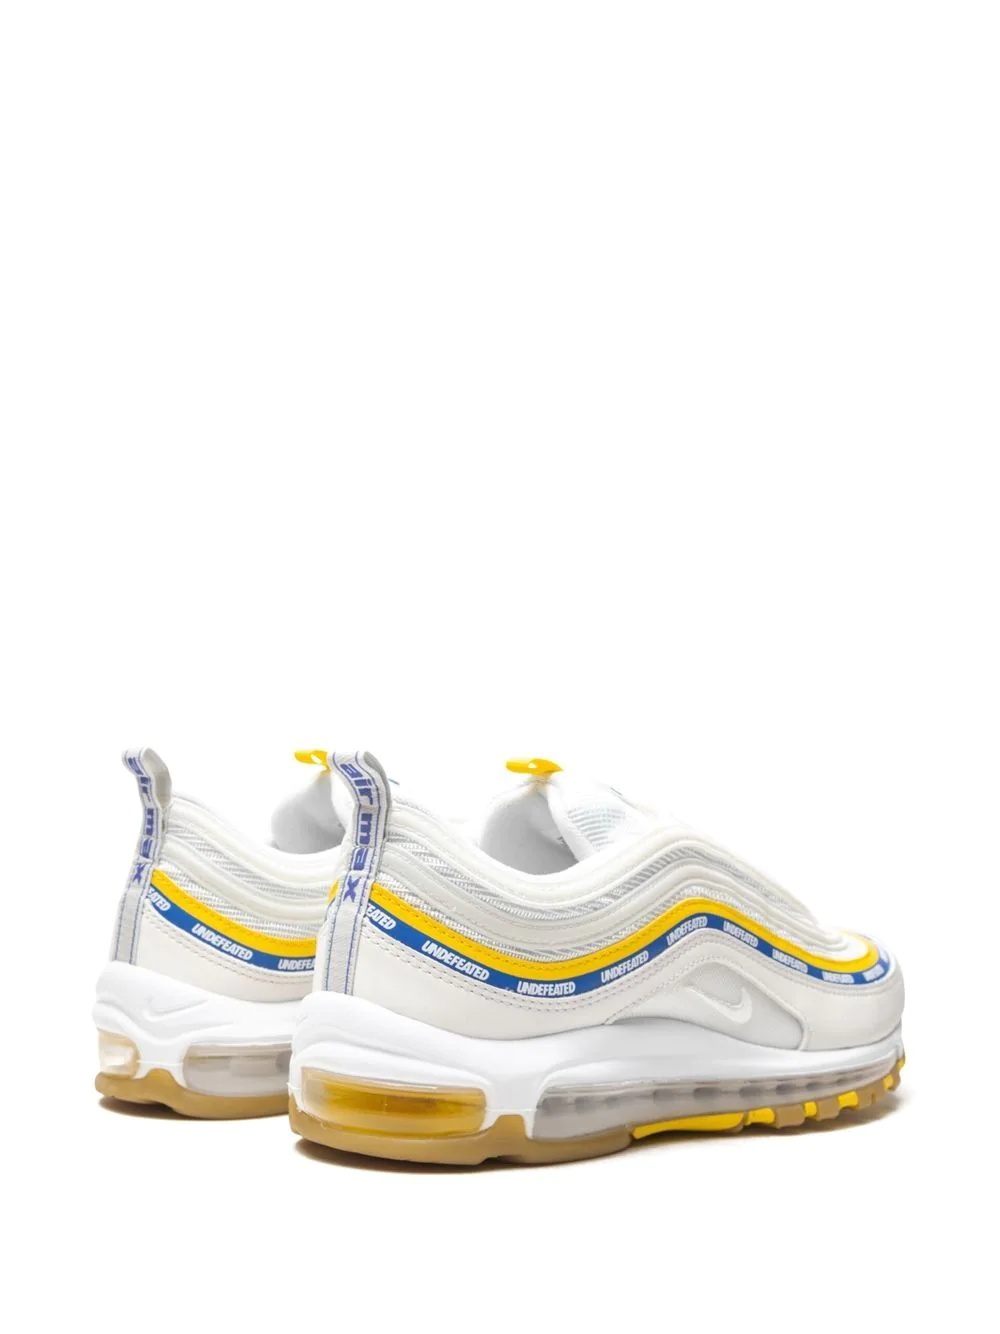 x Undefeated Air Max 97 sneakers - 3